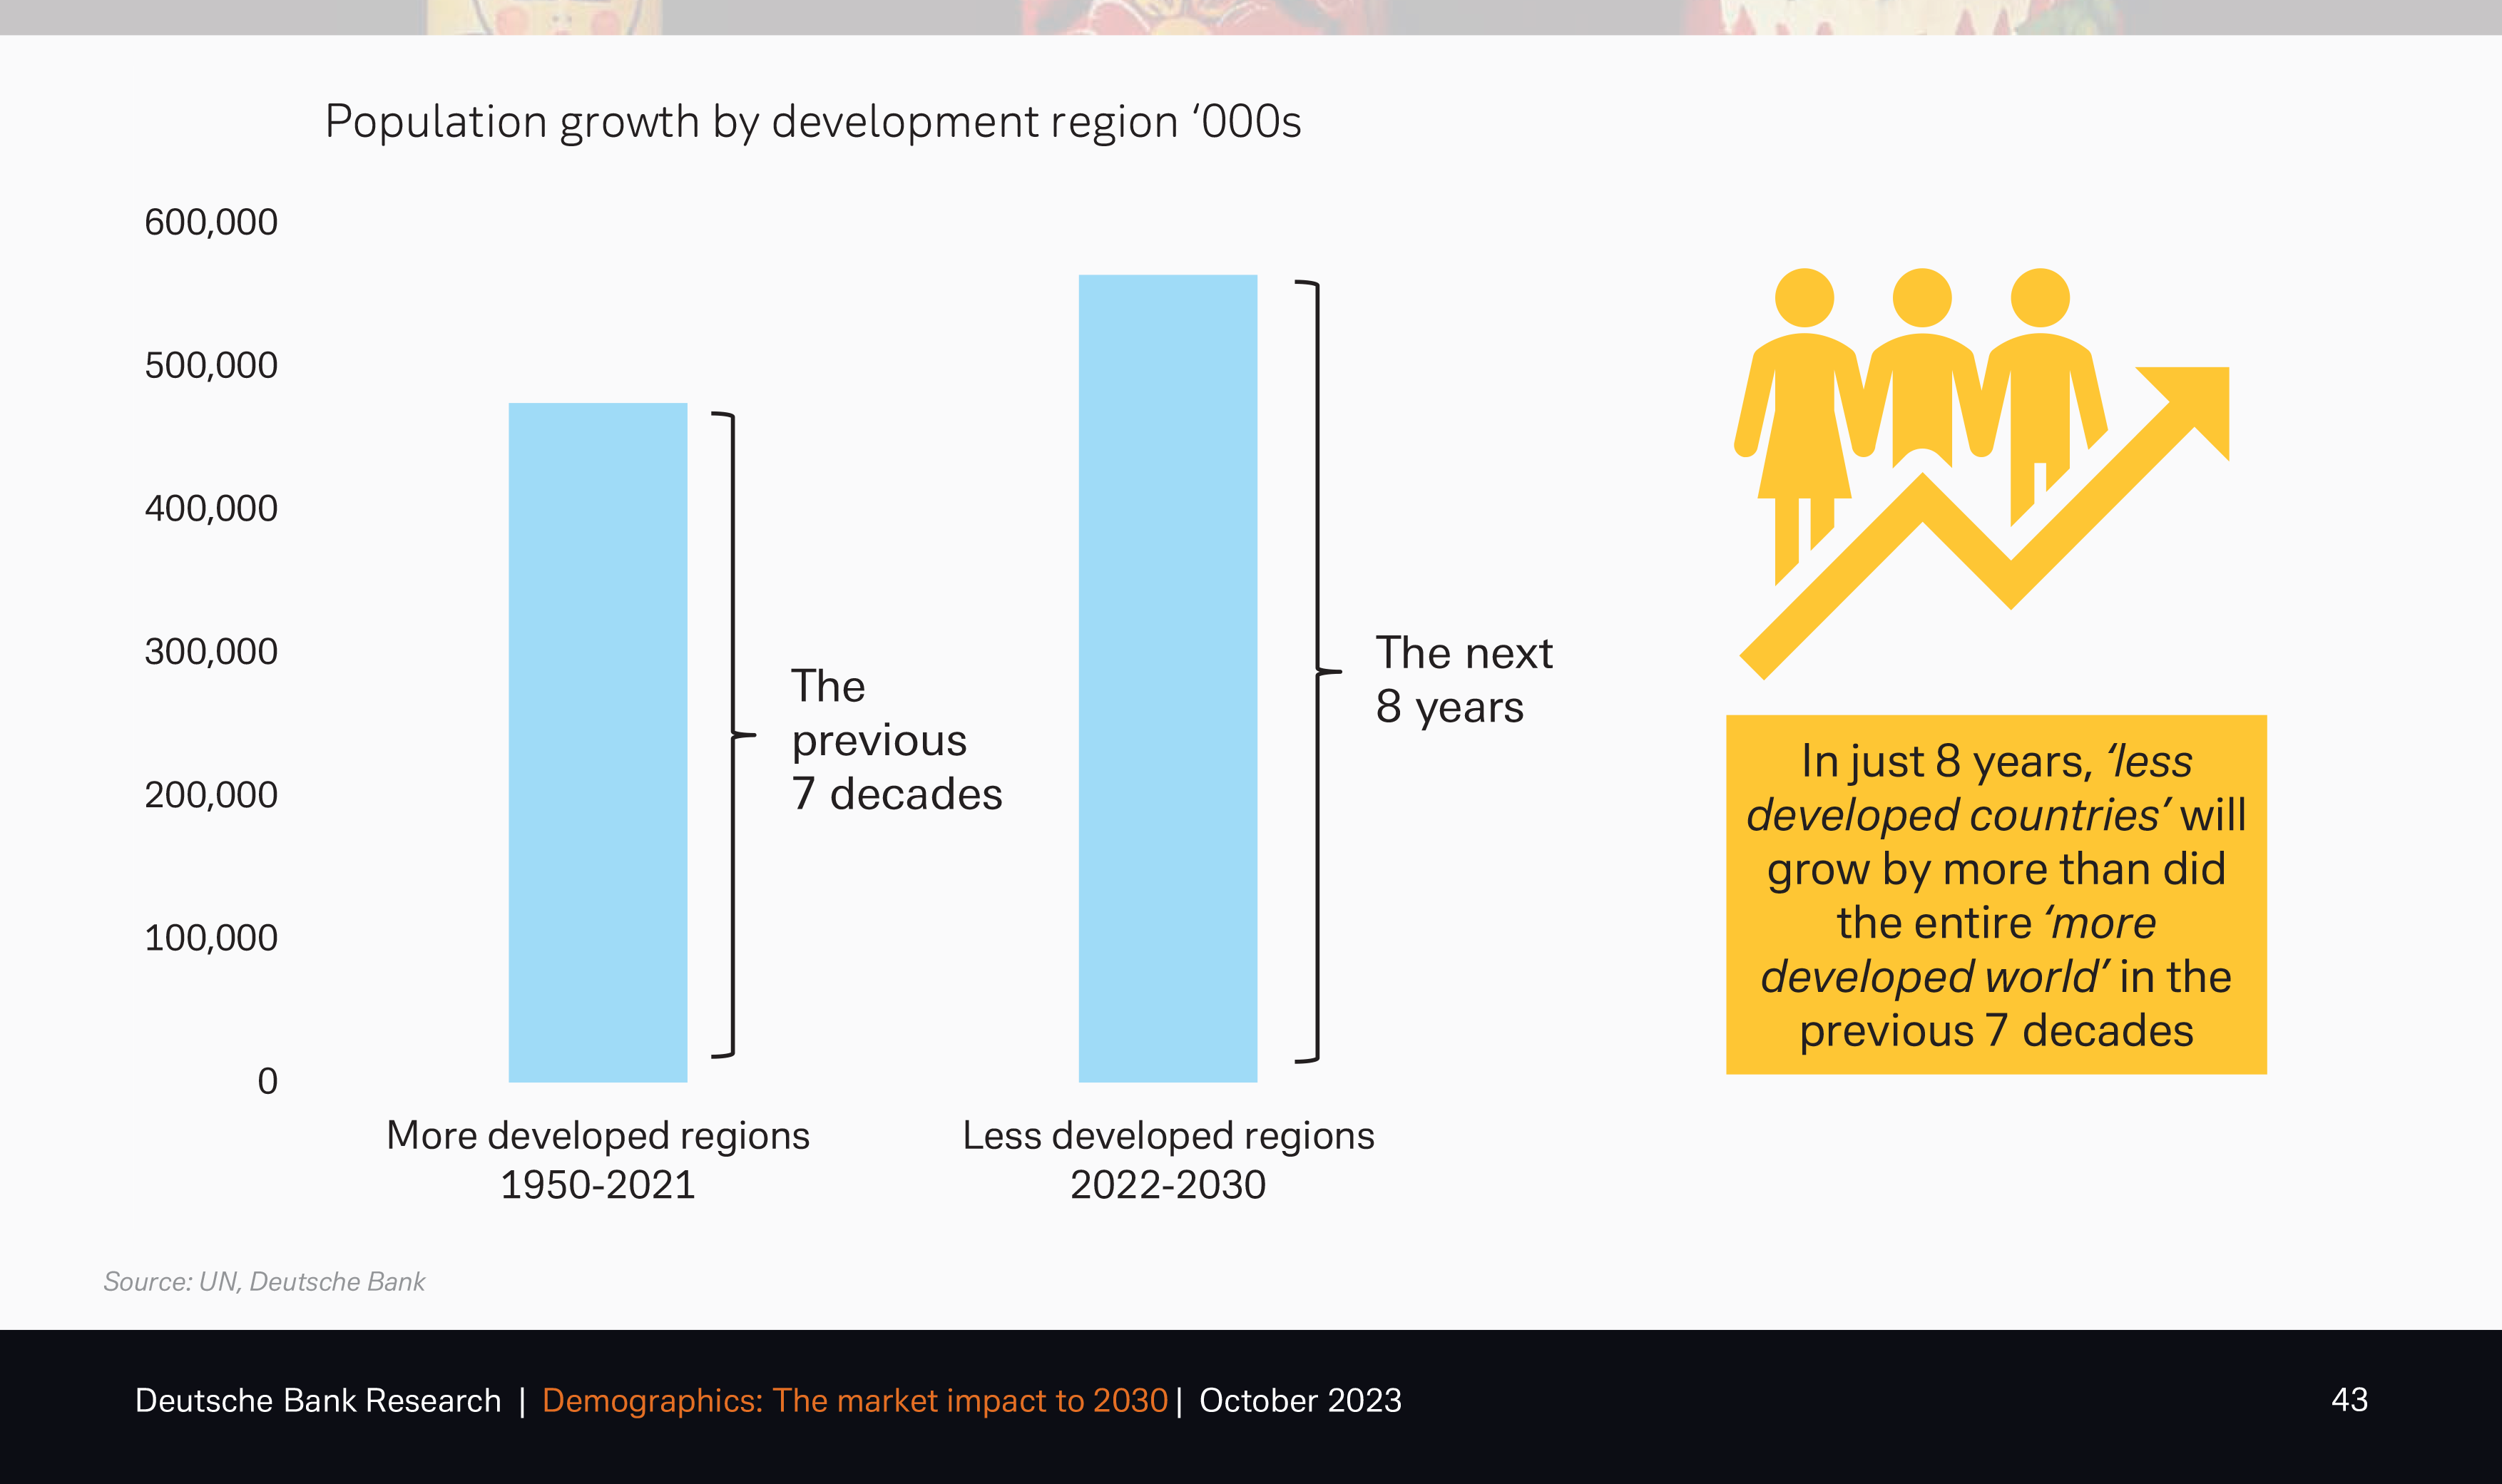 Growth in less developed regions will catalyse unprecedented demand for raw materials